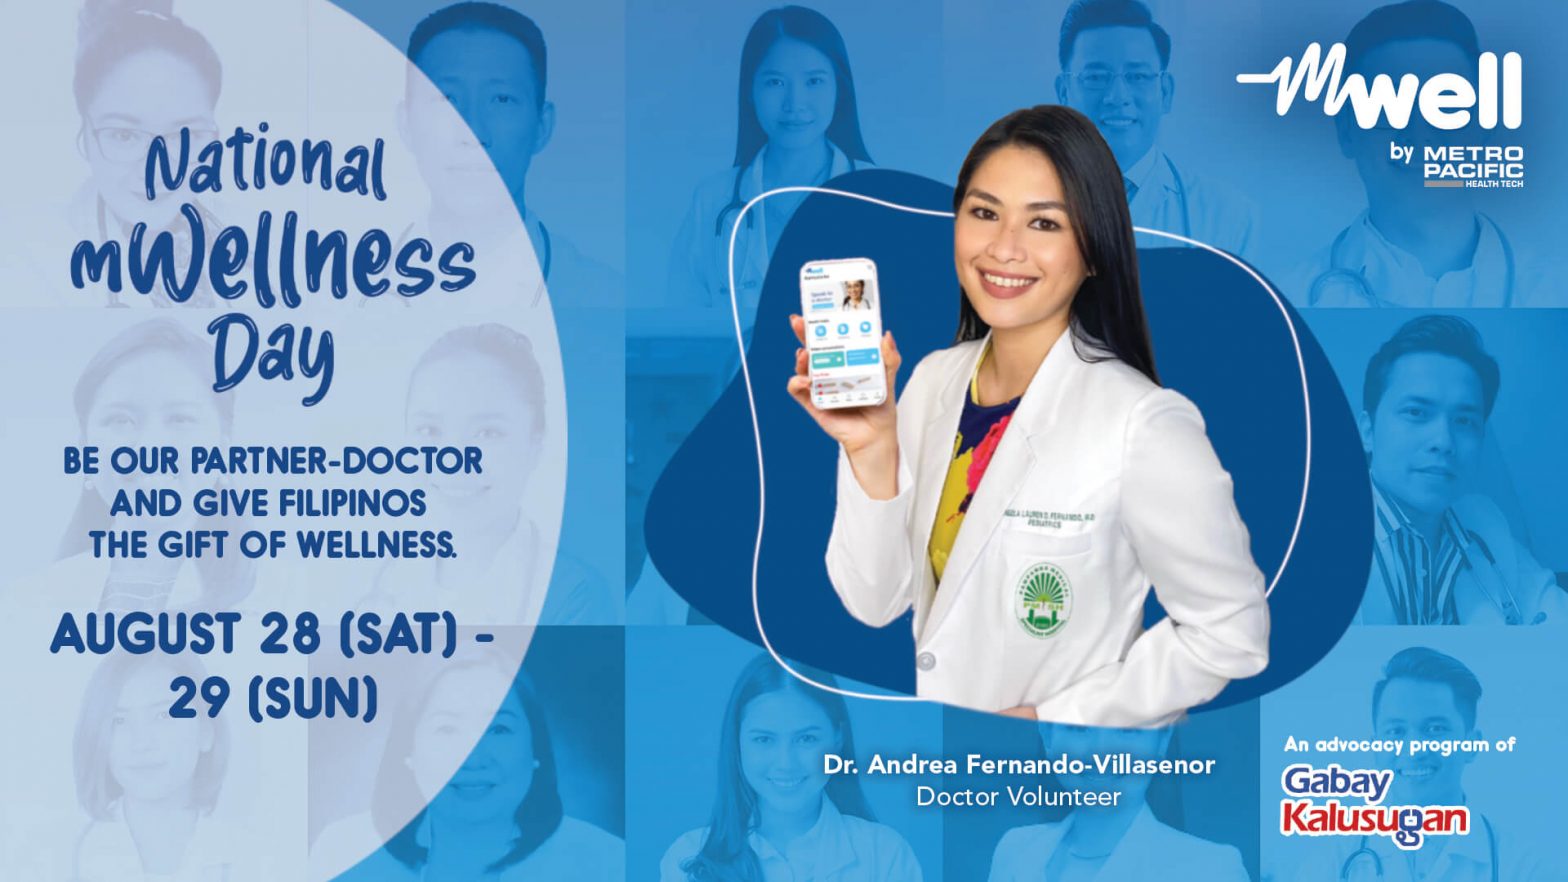 mWell rolls out 1st nationwide virtual medical mission